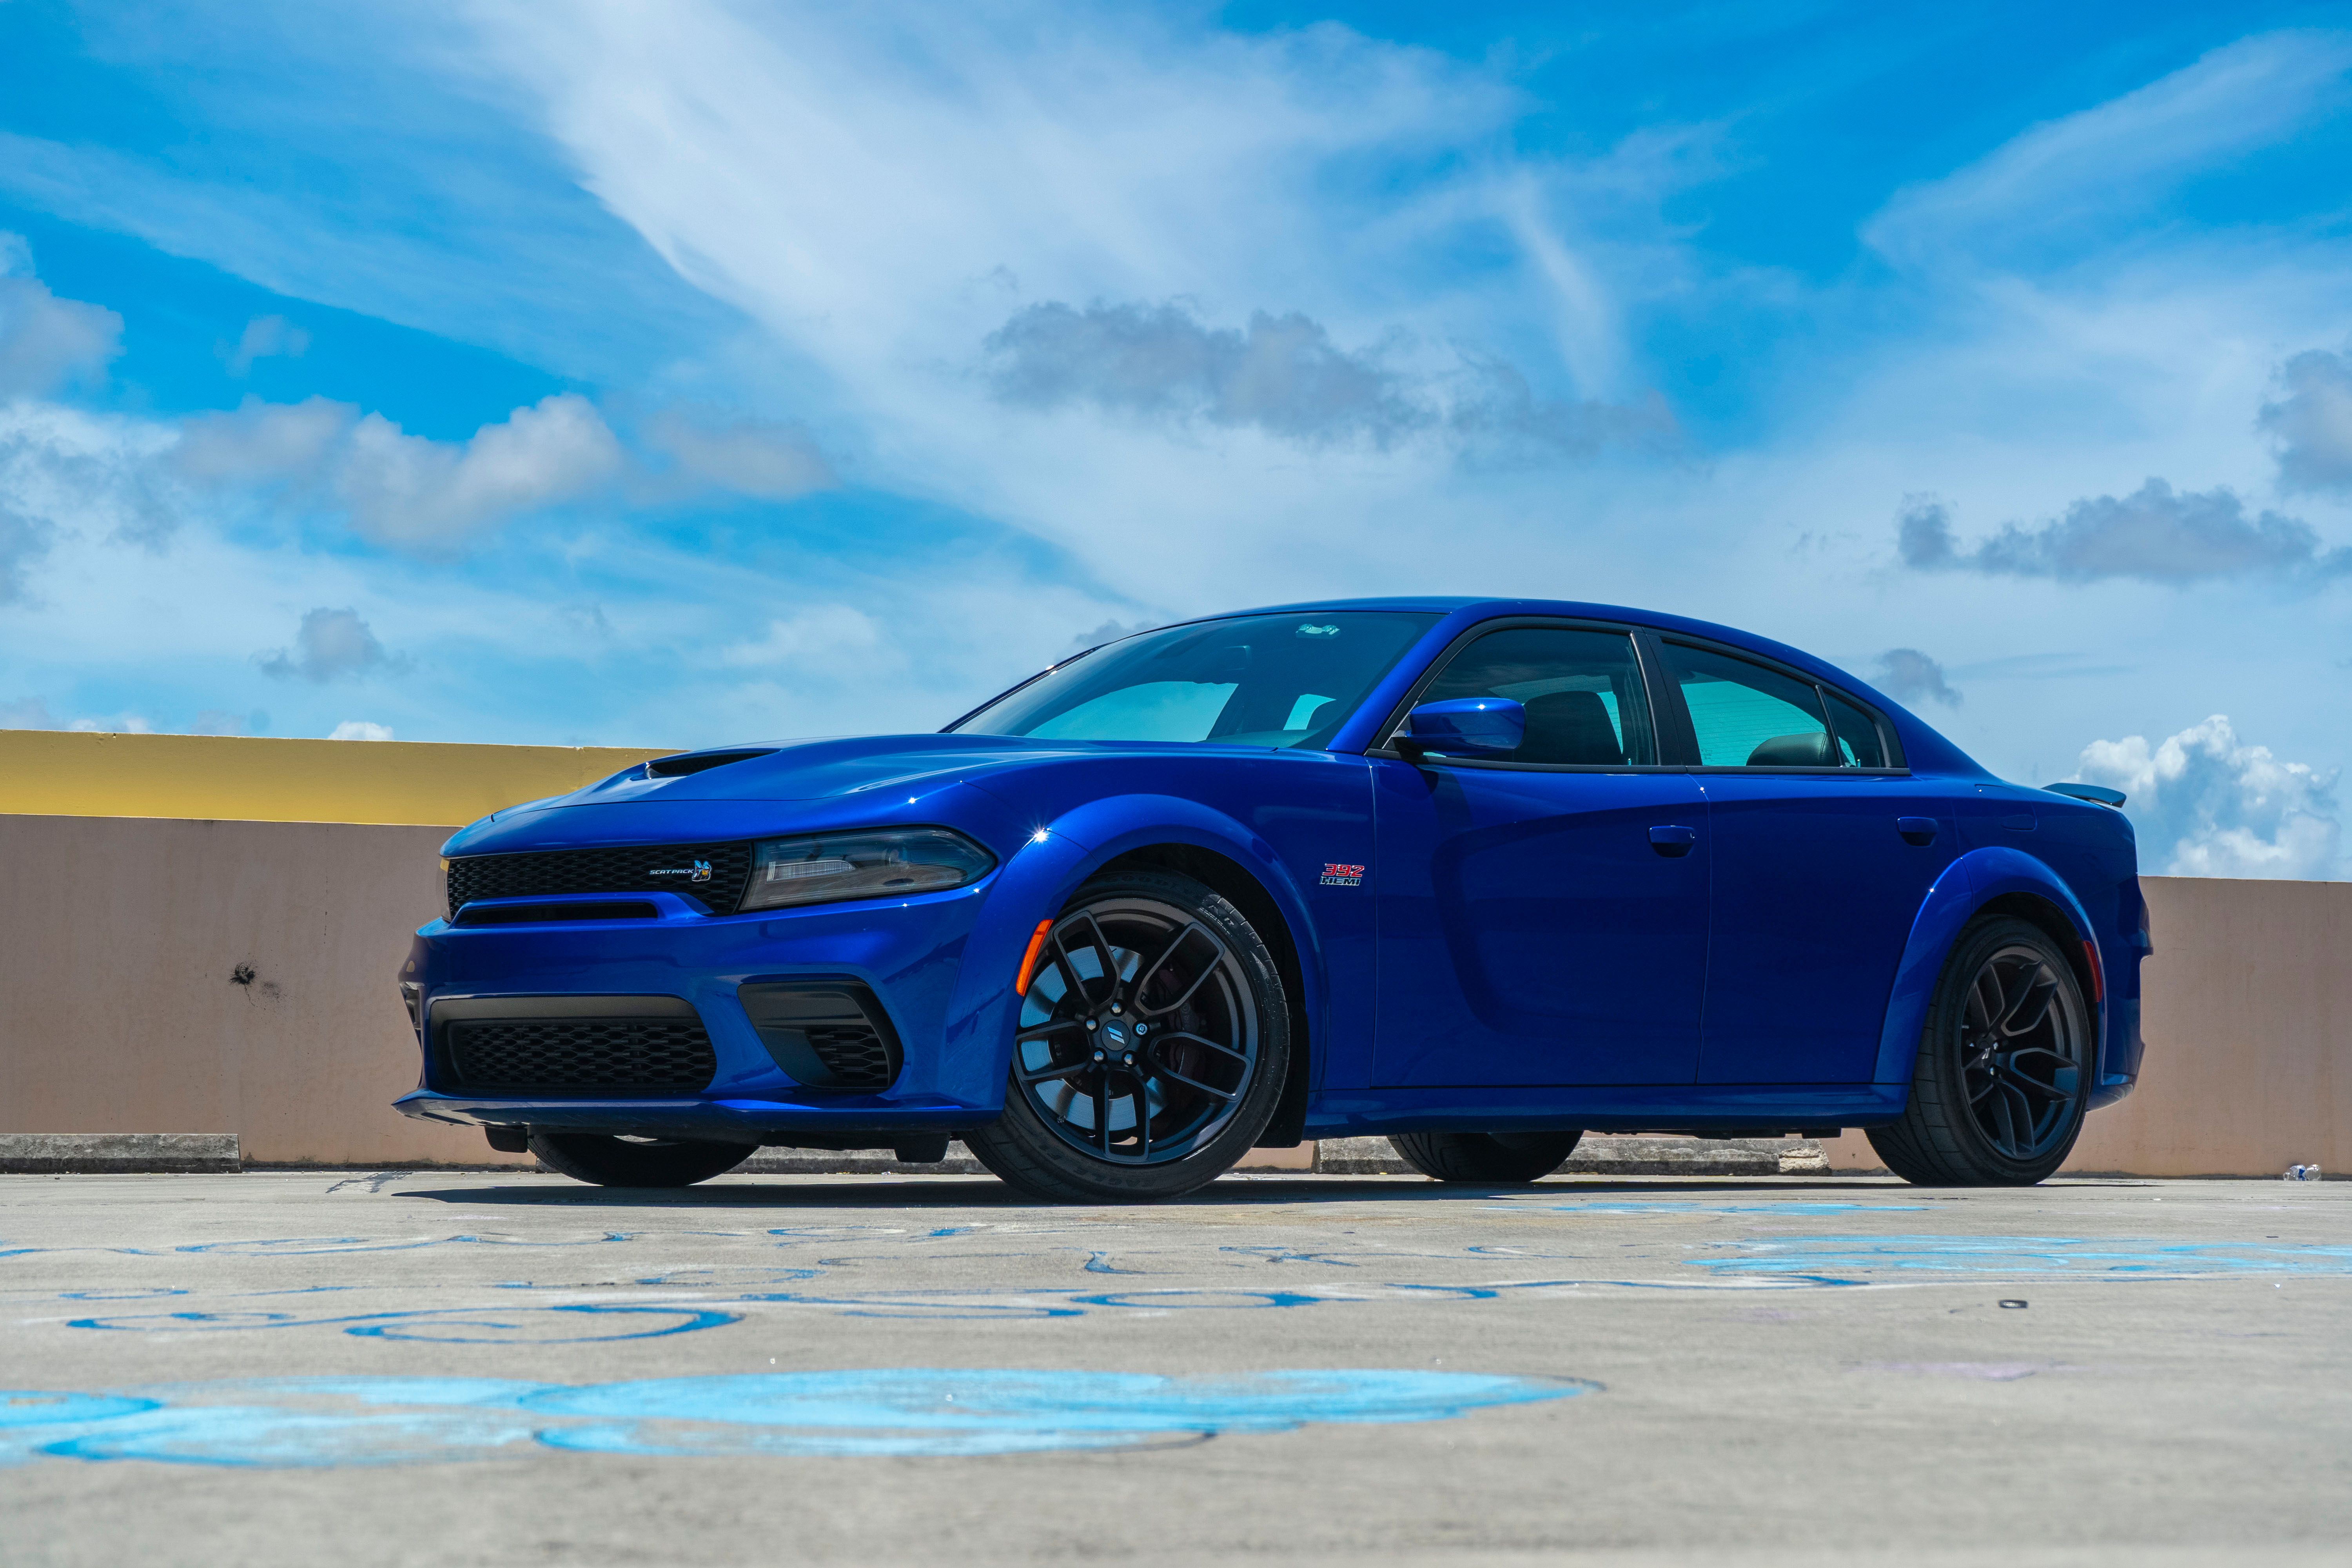 2020 Dodge Charger 392 Scat Pack Widebody Driven